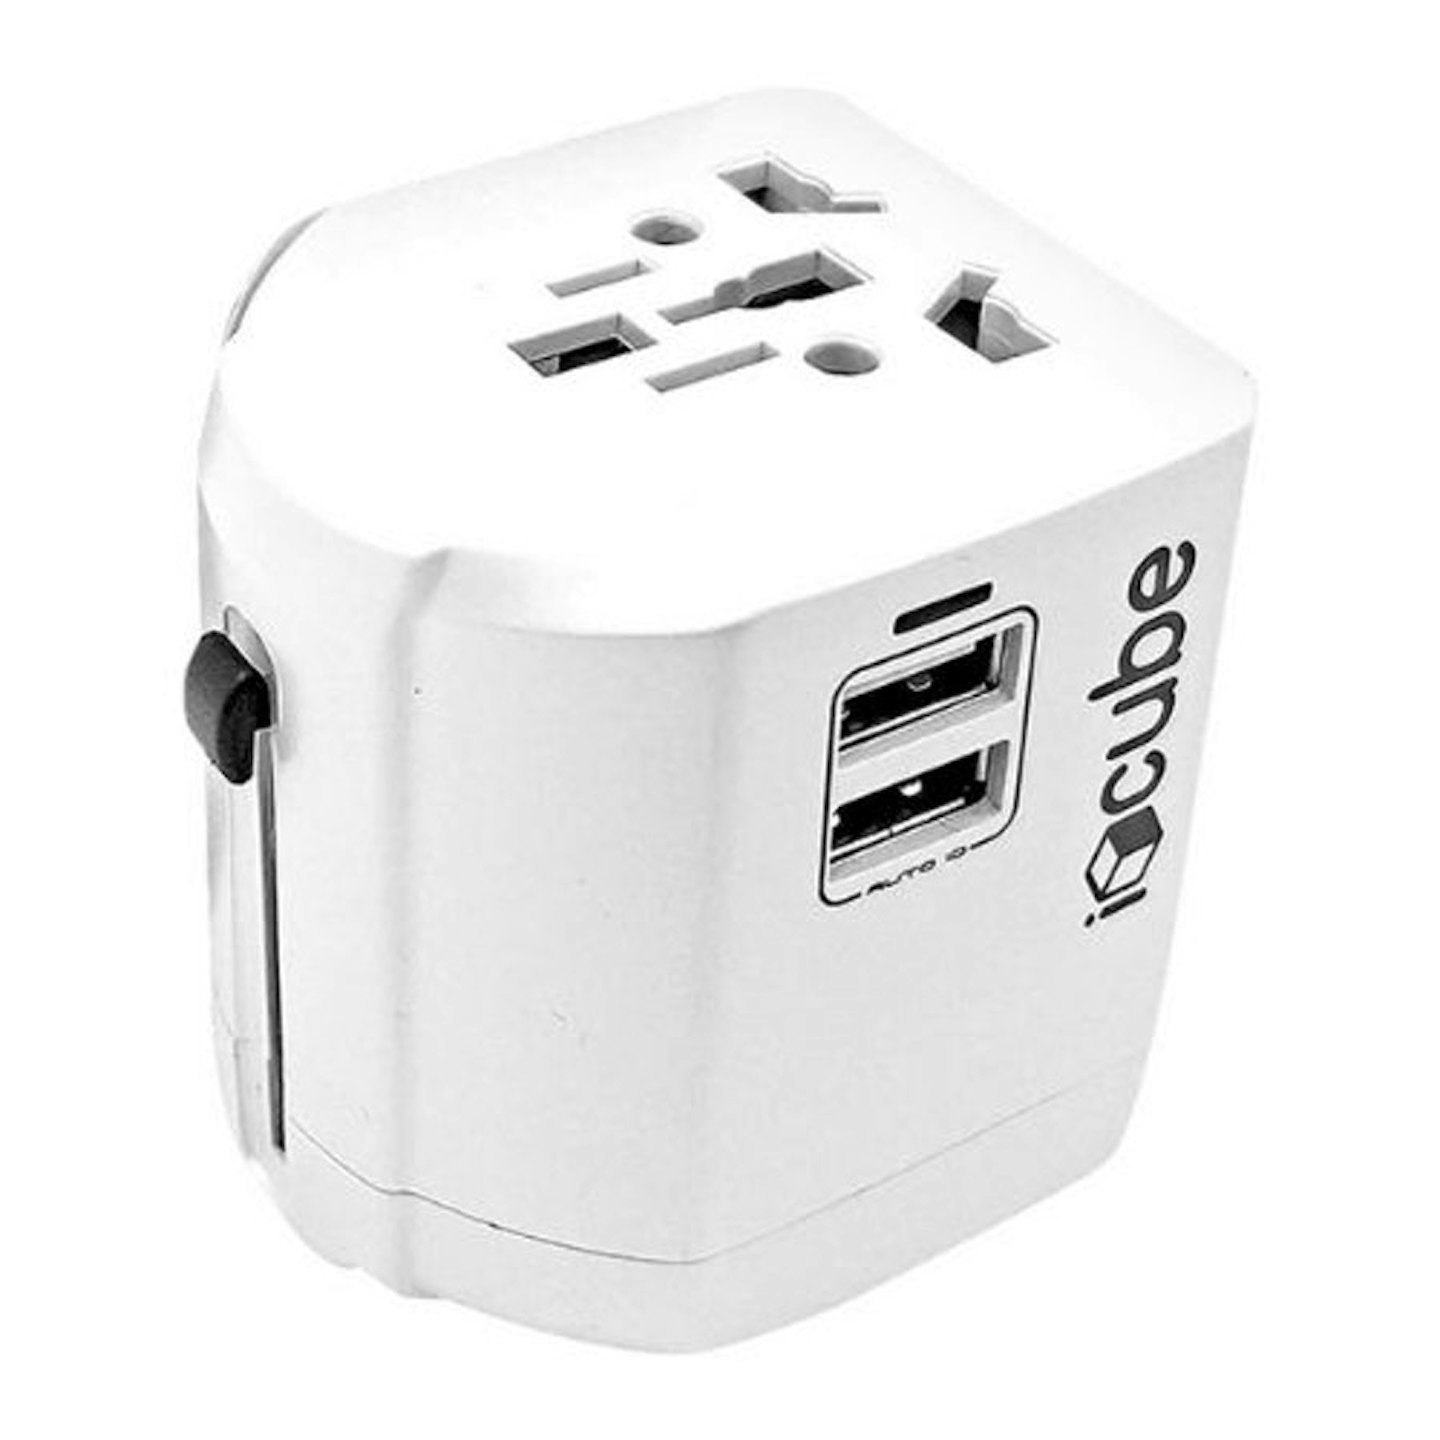 iBlockCube Worldwide Travel Plug Adapter with 2 USB 2.4A Charging Ports